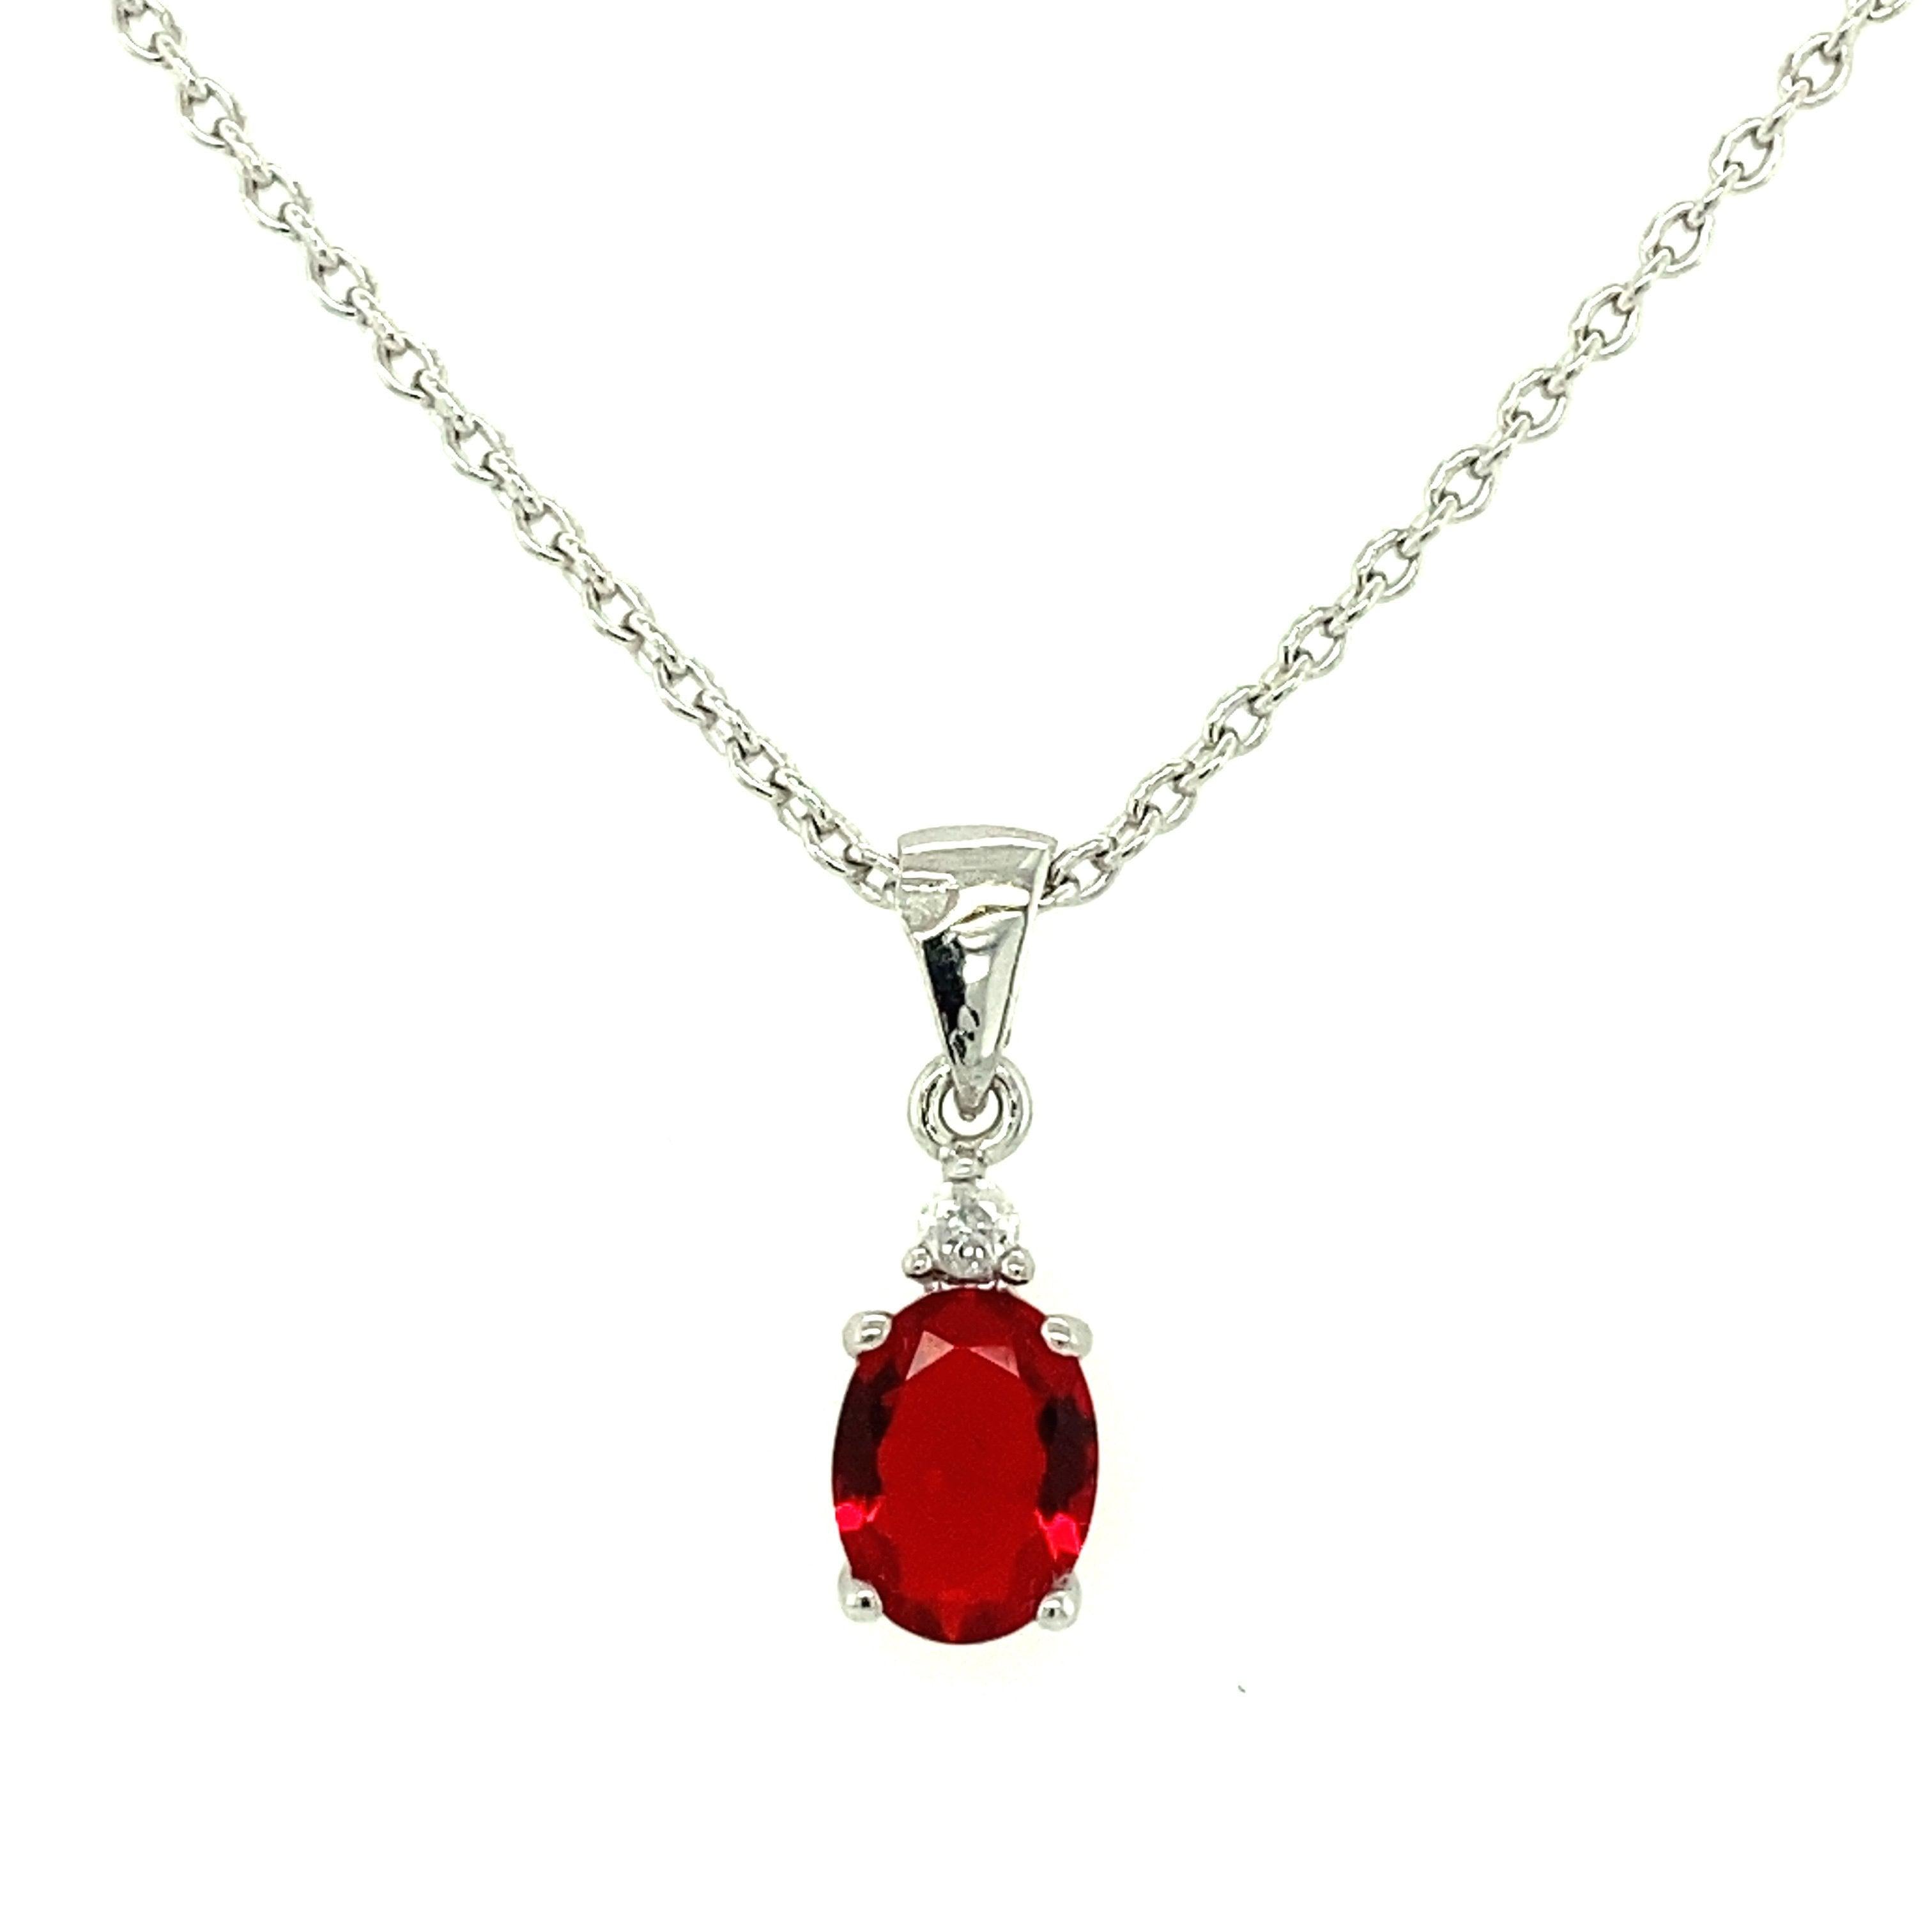 Asfour Crystal Silver Accessories Necklace N1650-R - 925 Sterling Silver